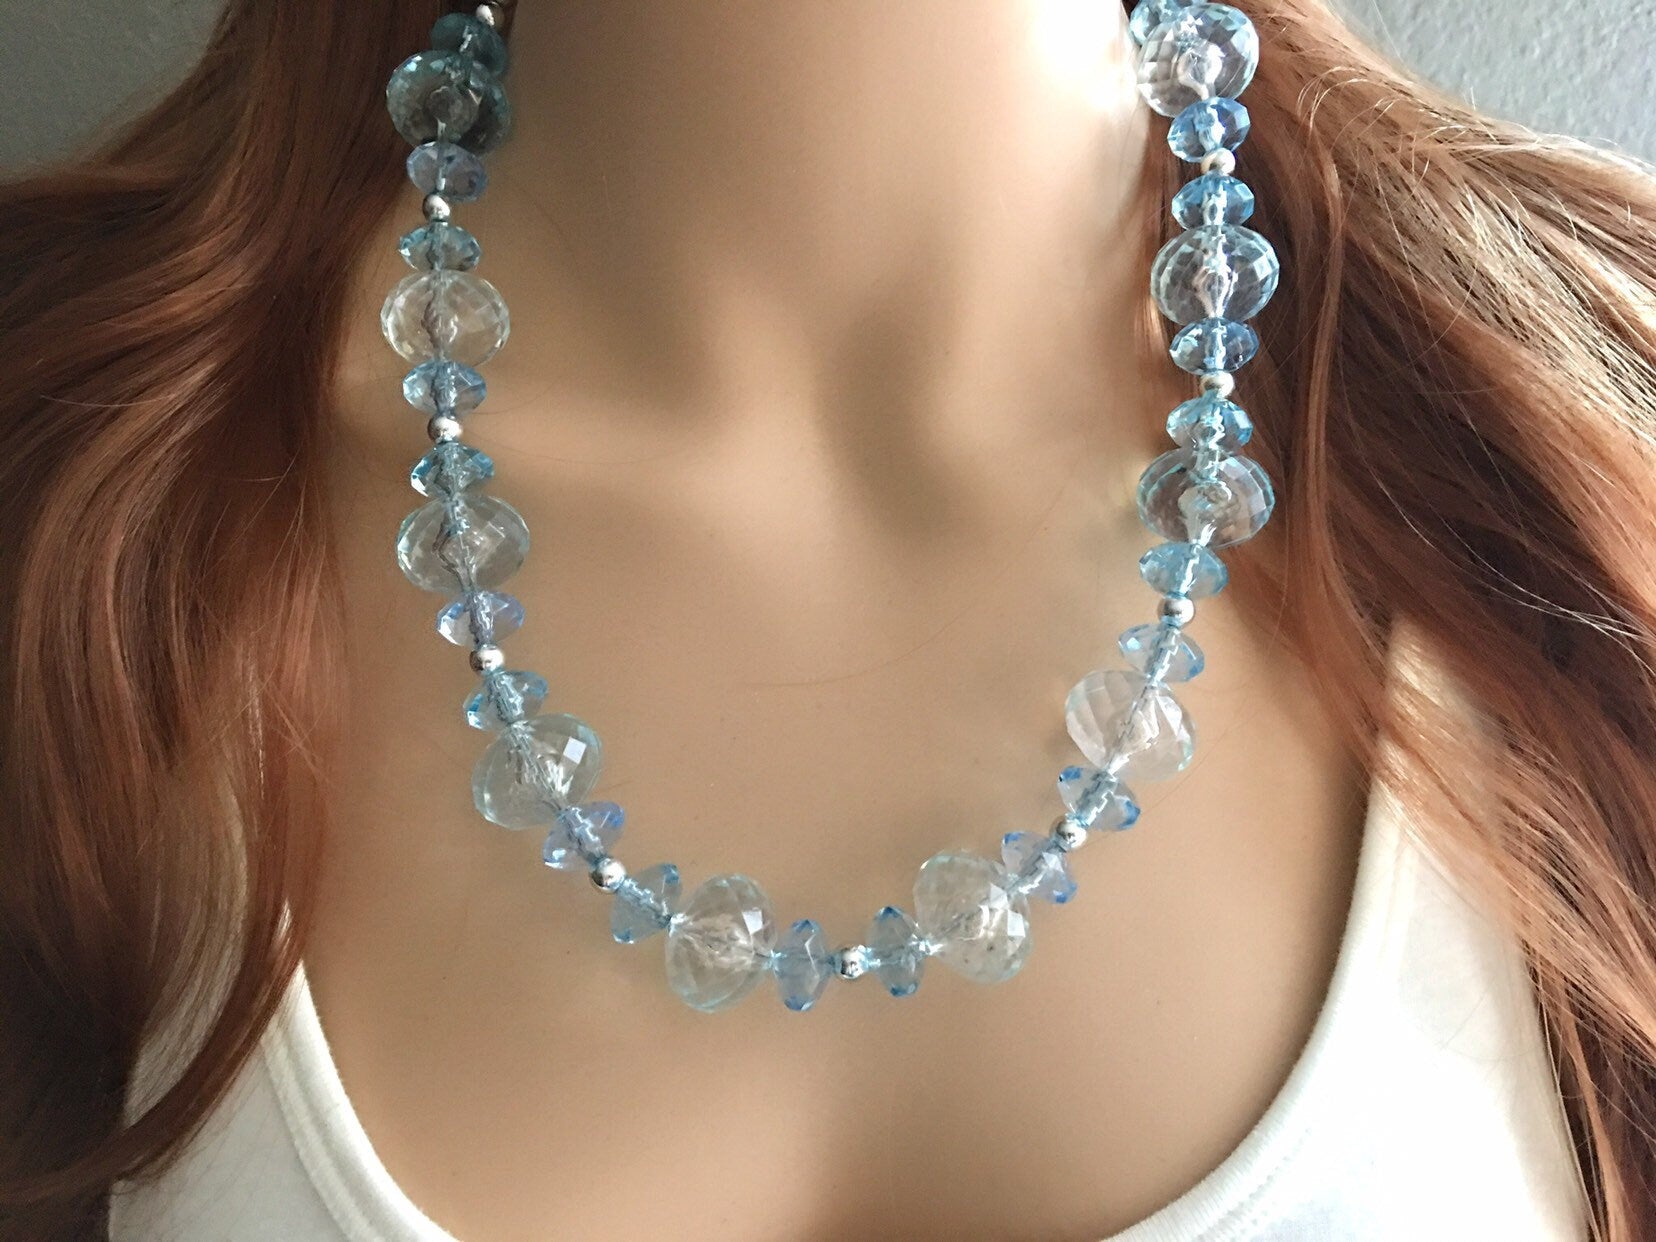 Sparkling 5 Strand Cascade Design Necklace, Borealis Baby Blue Glass Beads  W/ Pastel Sparks & Nice Jeweled Clasp Art.416/6 - Etsy